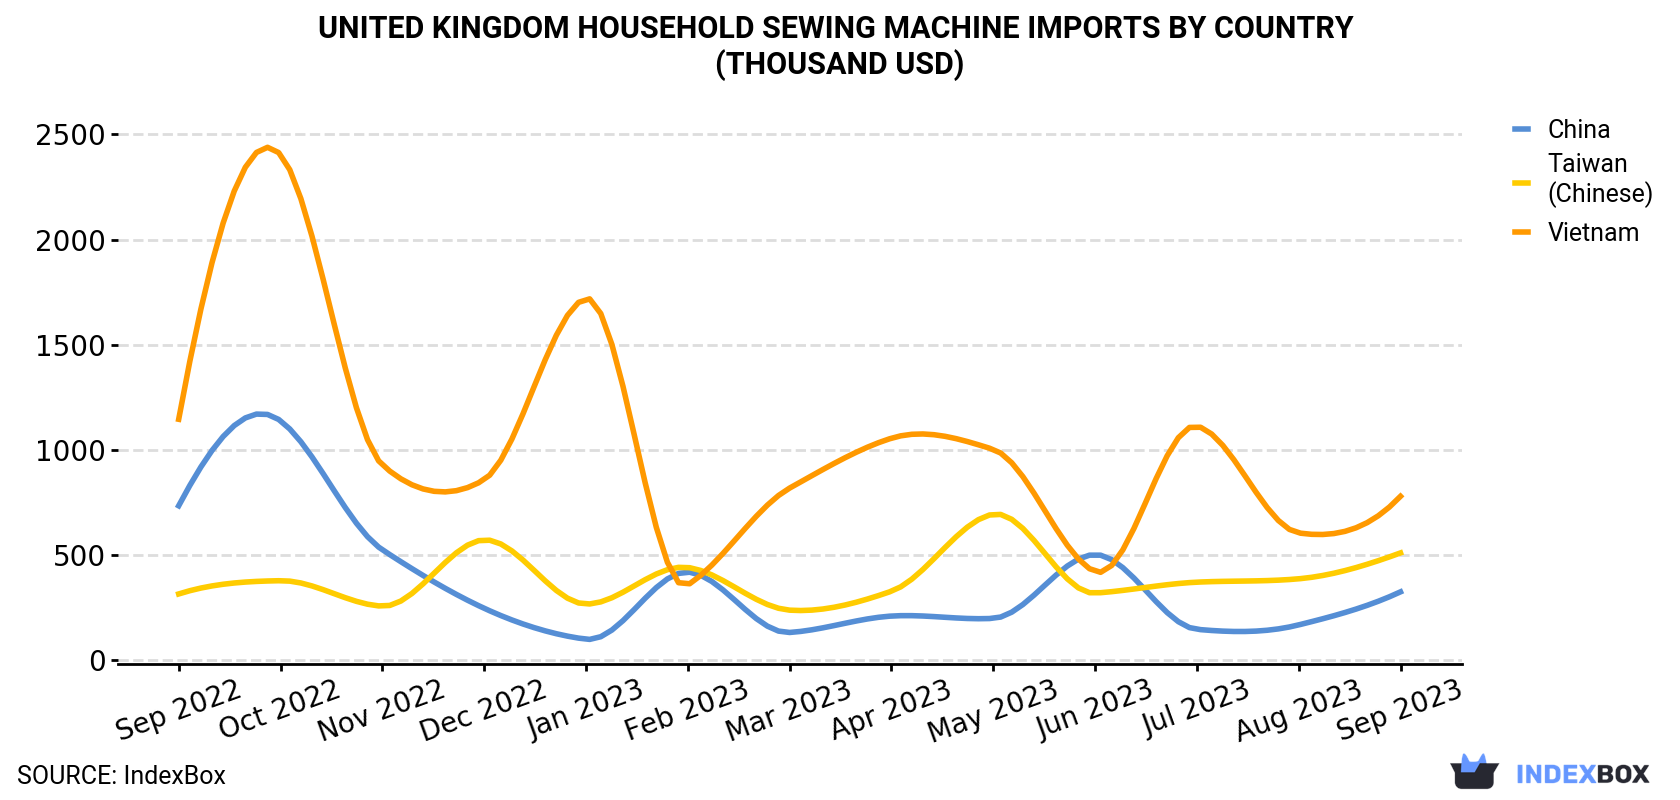 United Kingdom Household Sewing Machine Imports By Country (Thousand USD)